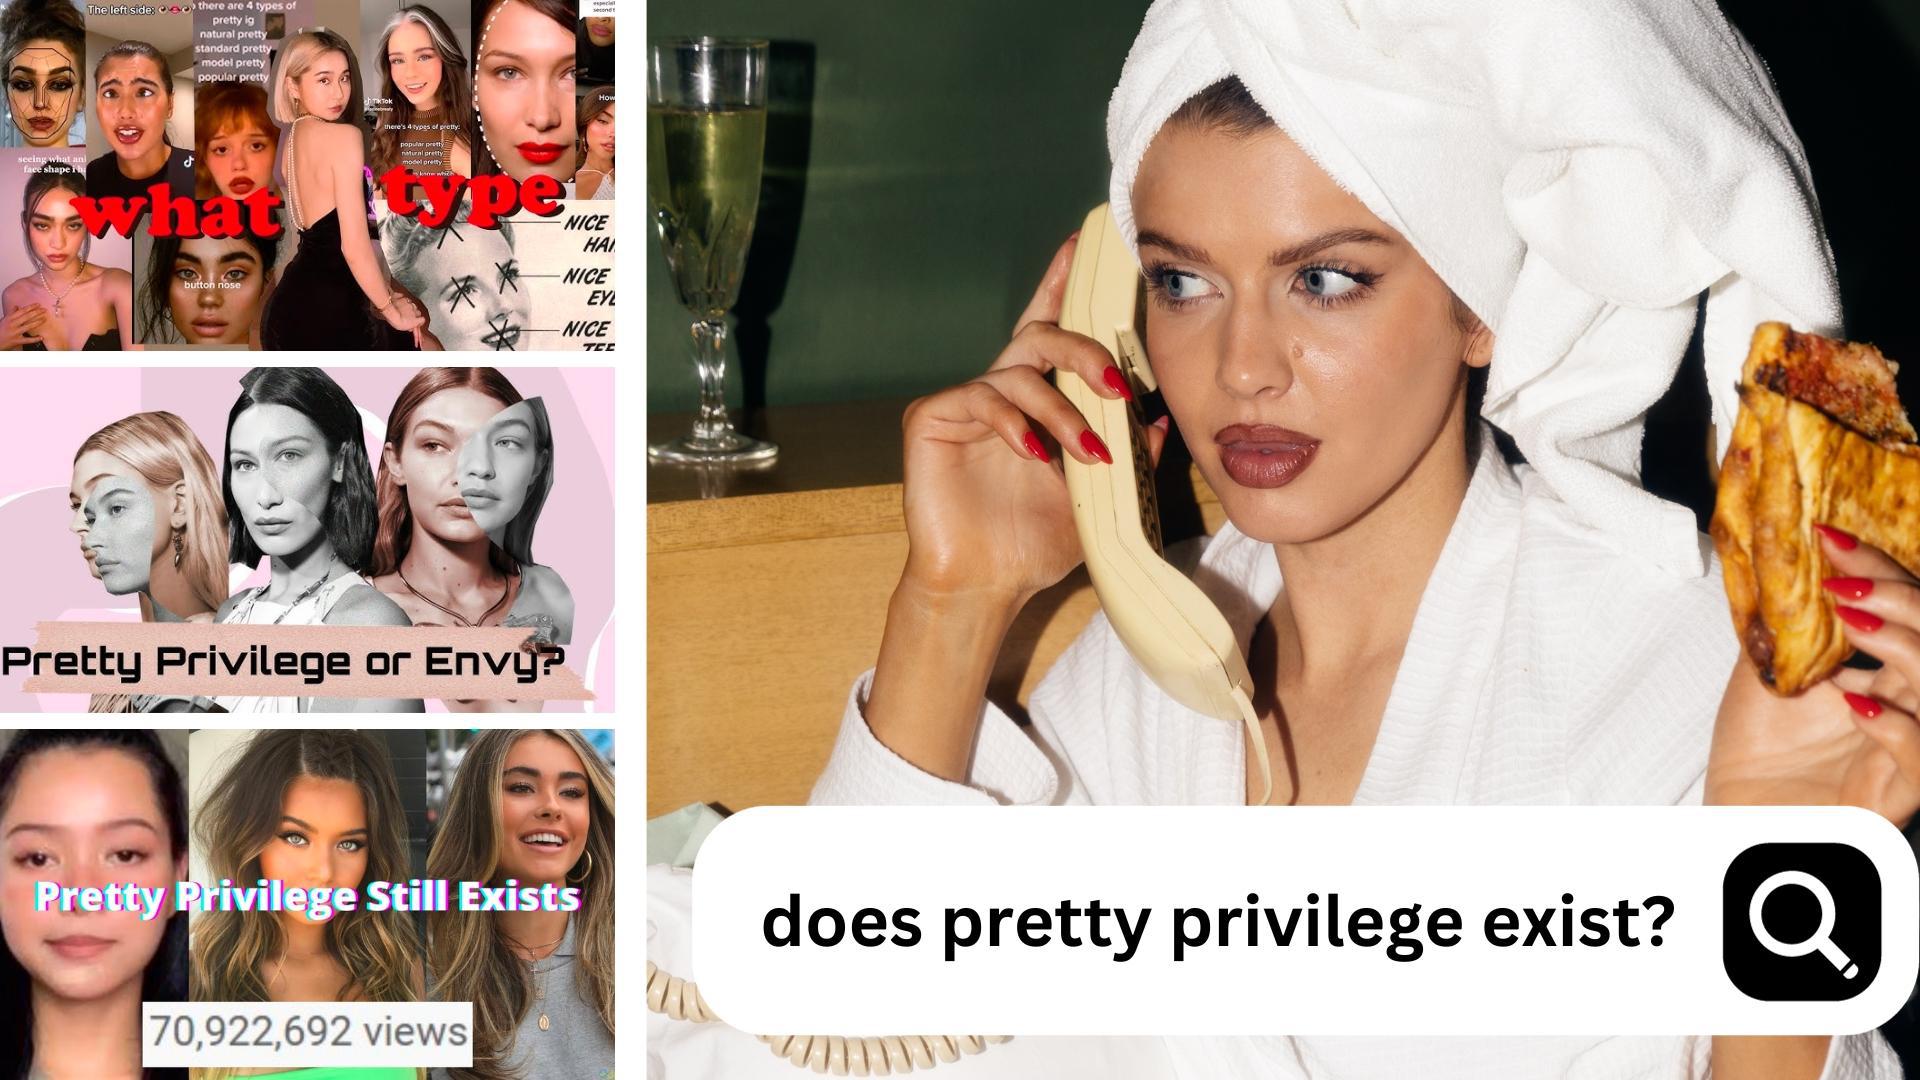 YouTube thumbnails illustrating pretty privilege arguments are shown in a column to the (left) and a model with the search bar query underneath is shown (right).